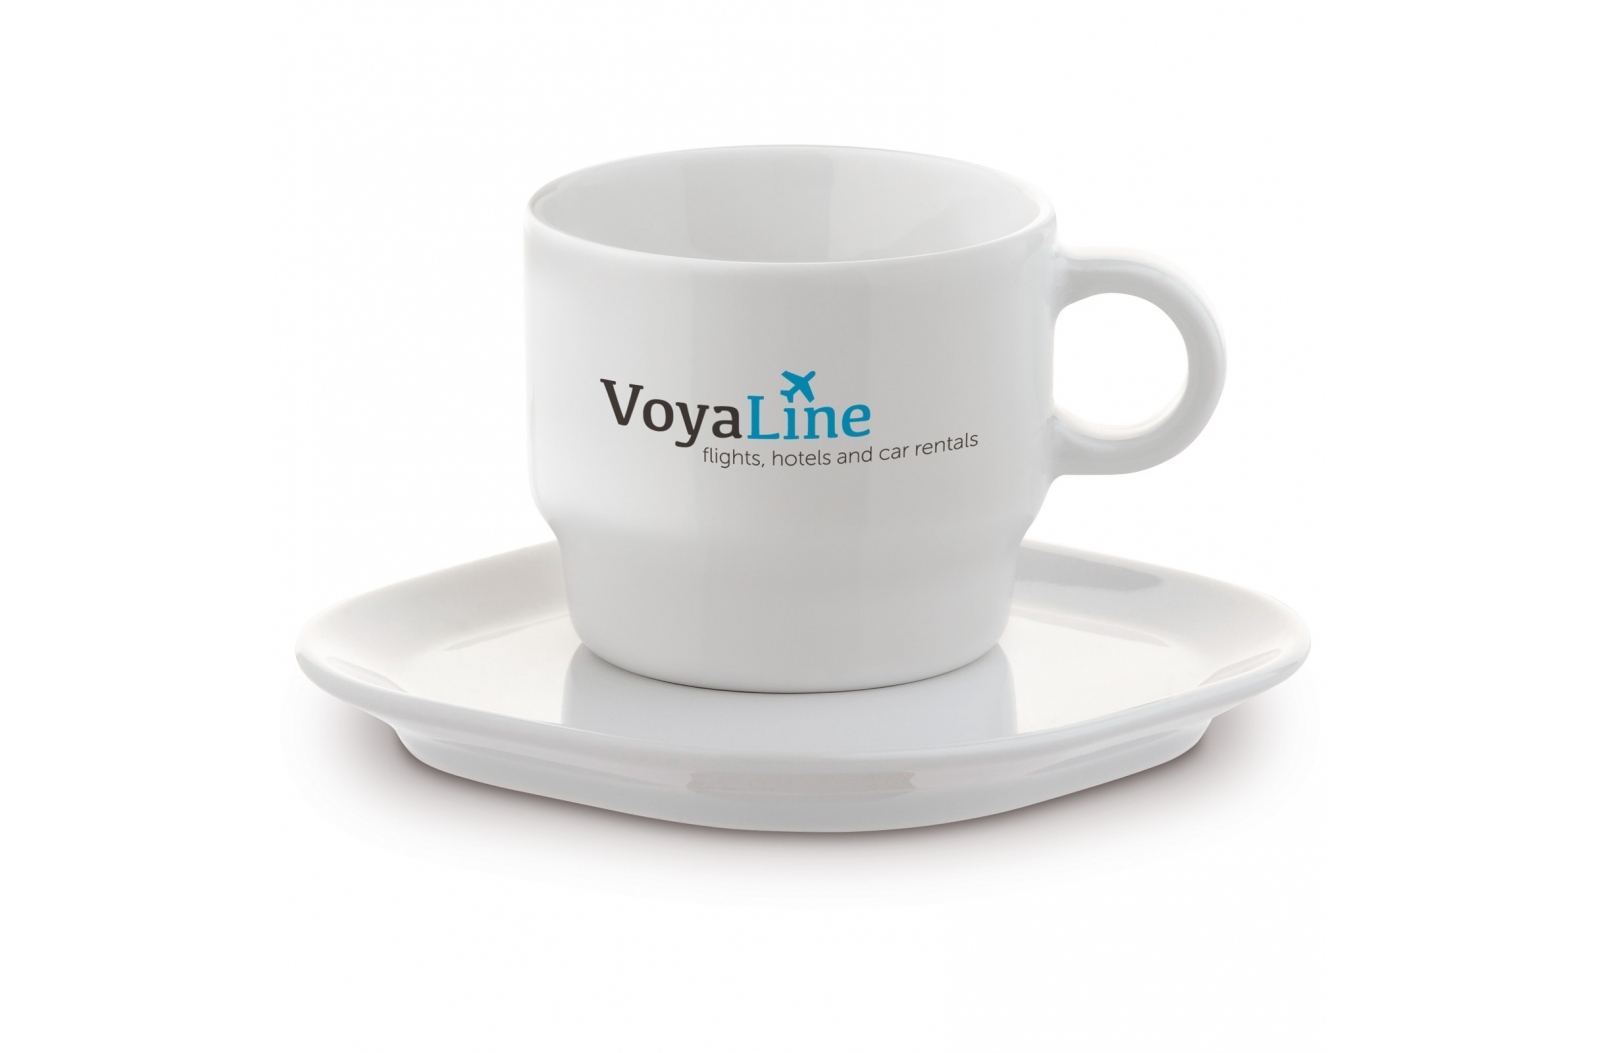 High-Quality Porcelain Cup and Saucer 'Satellite' Series - Wells-next-the-Sea